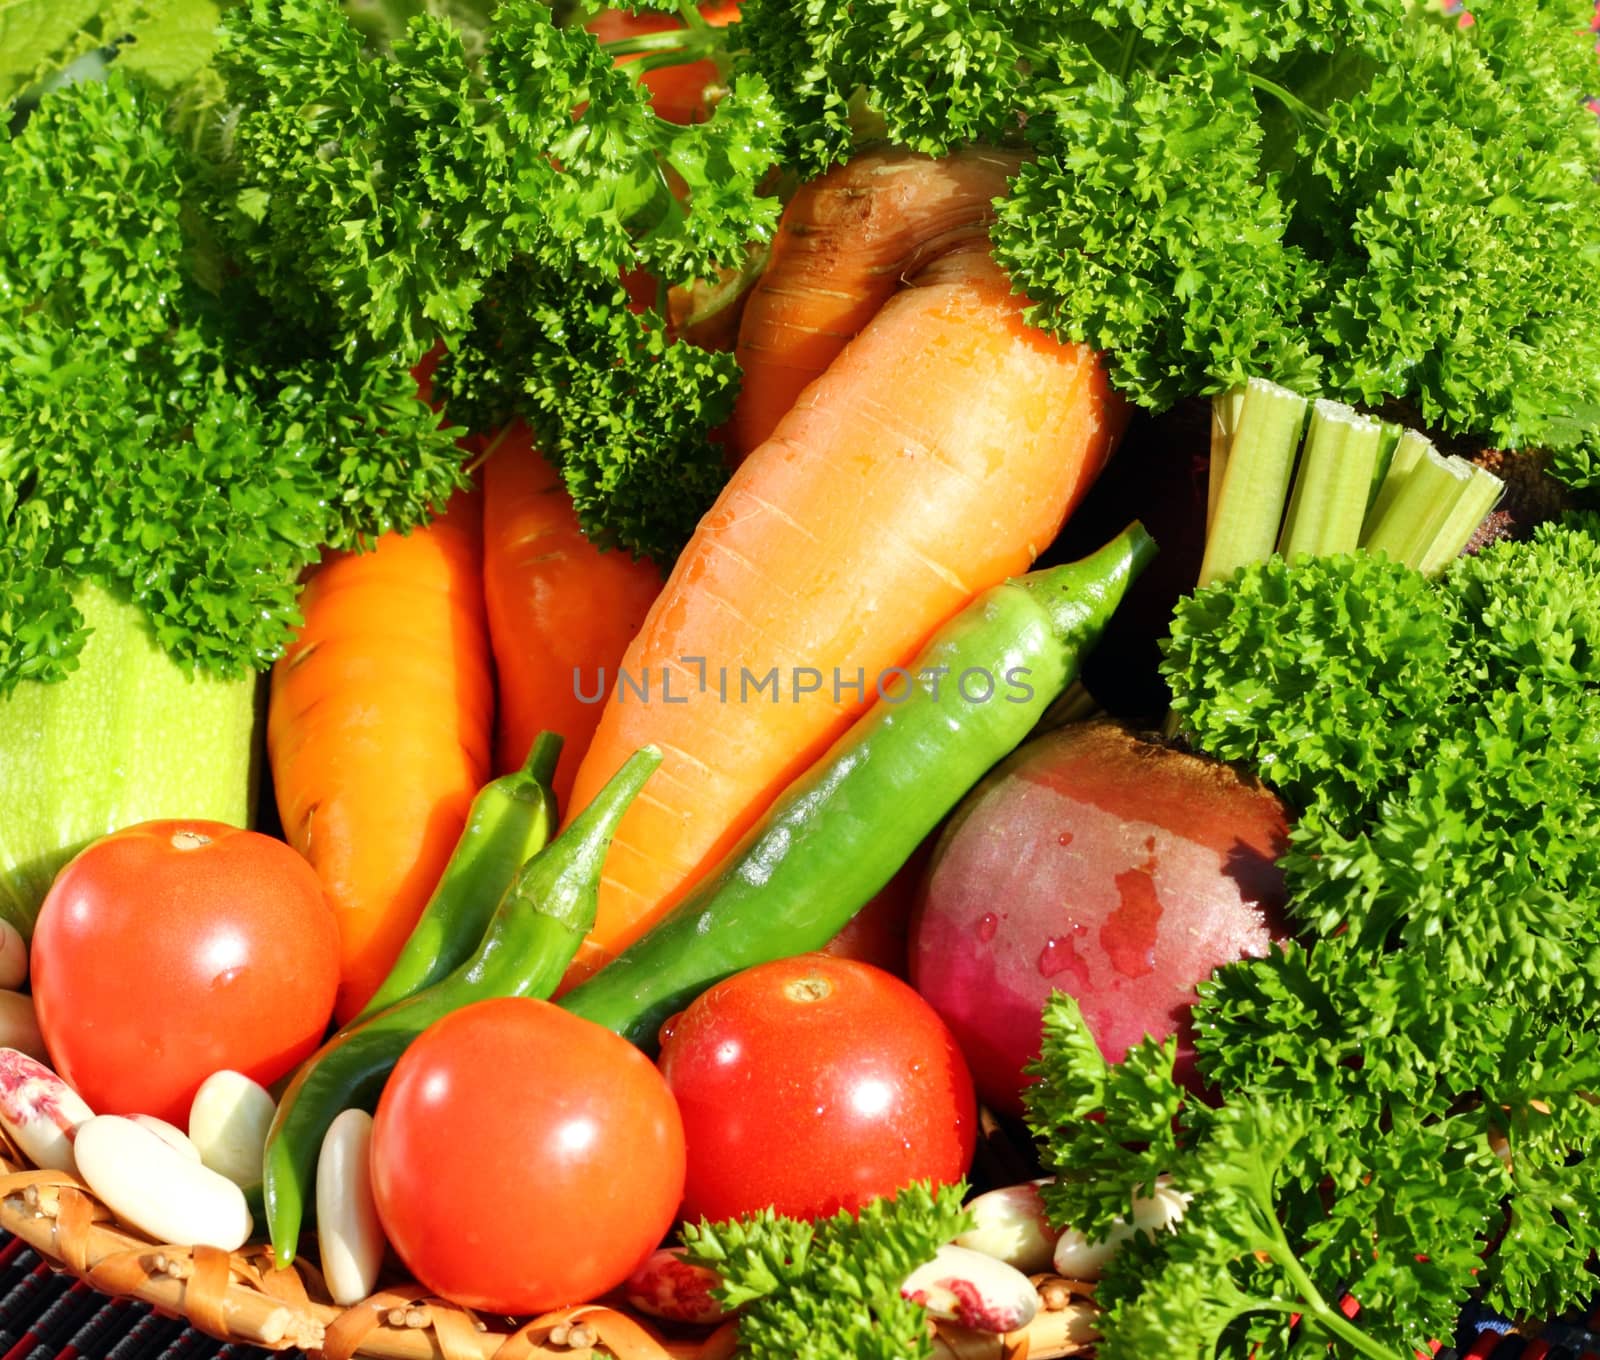 It is a mix of fresh vegetables